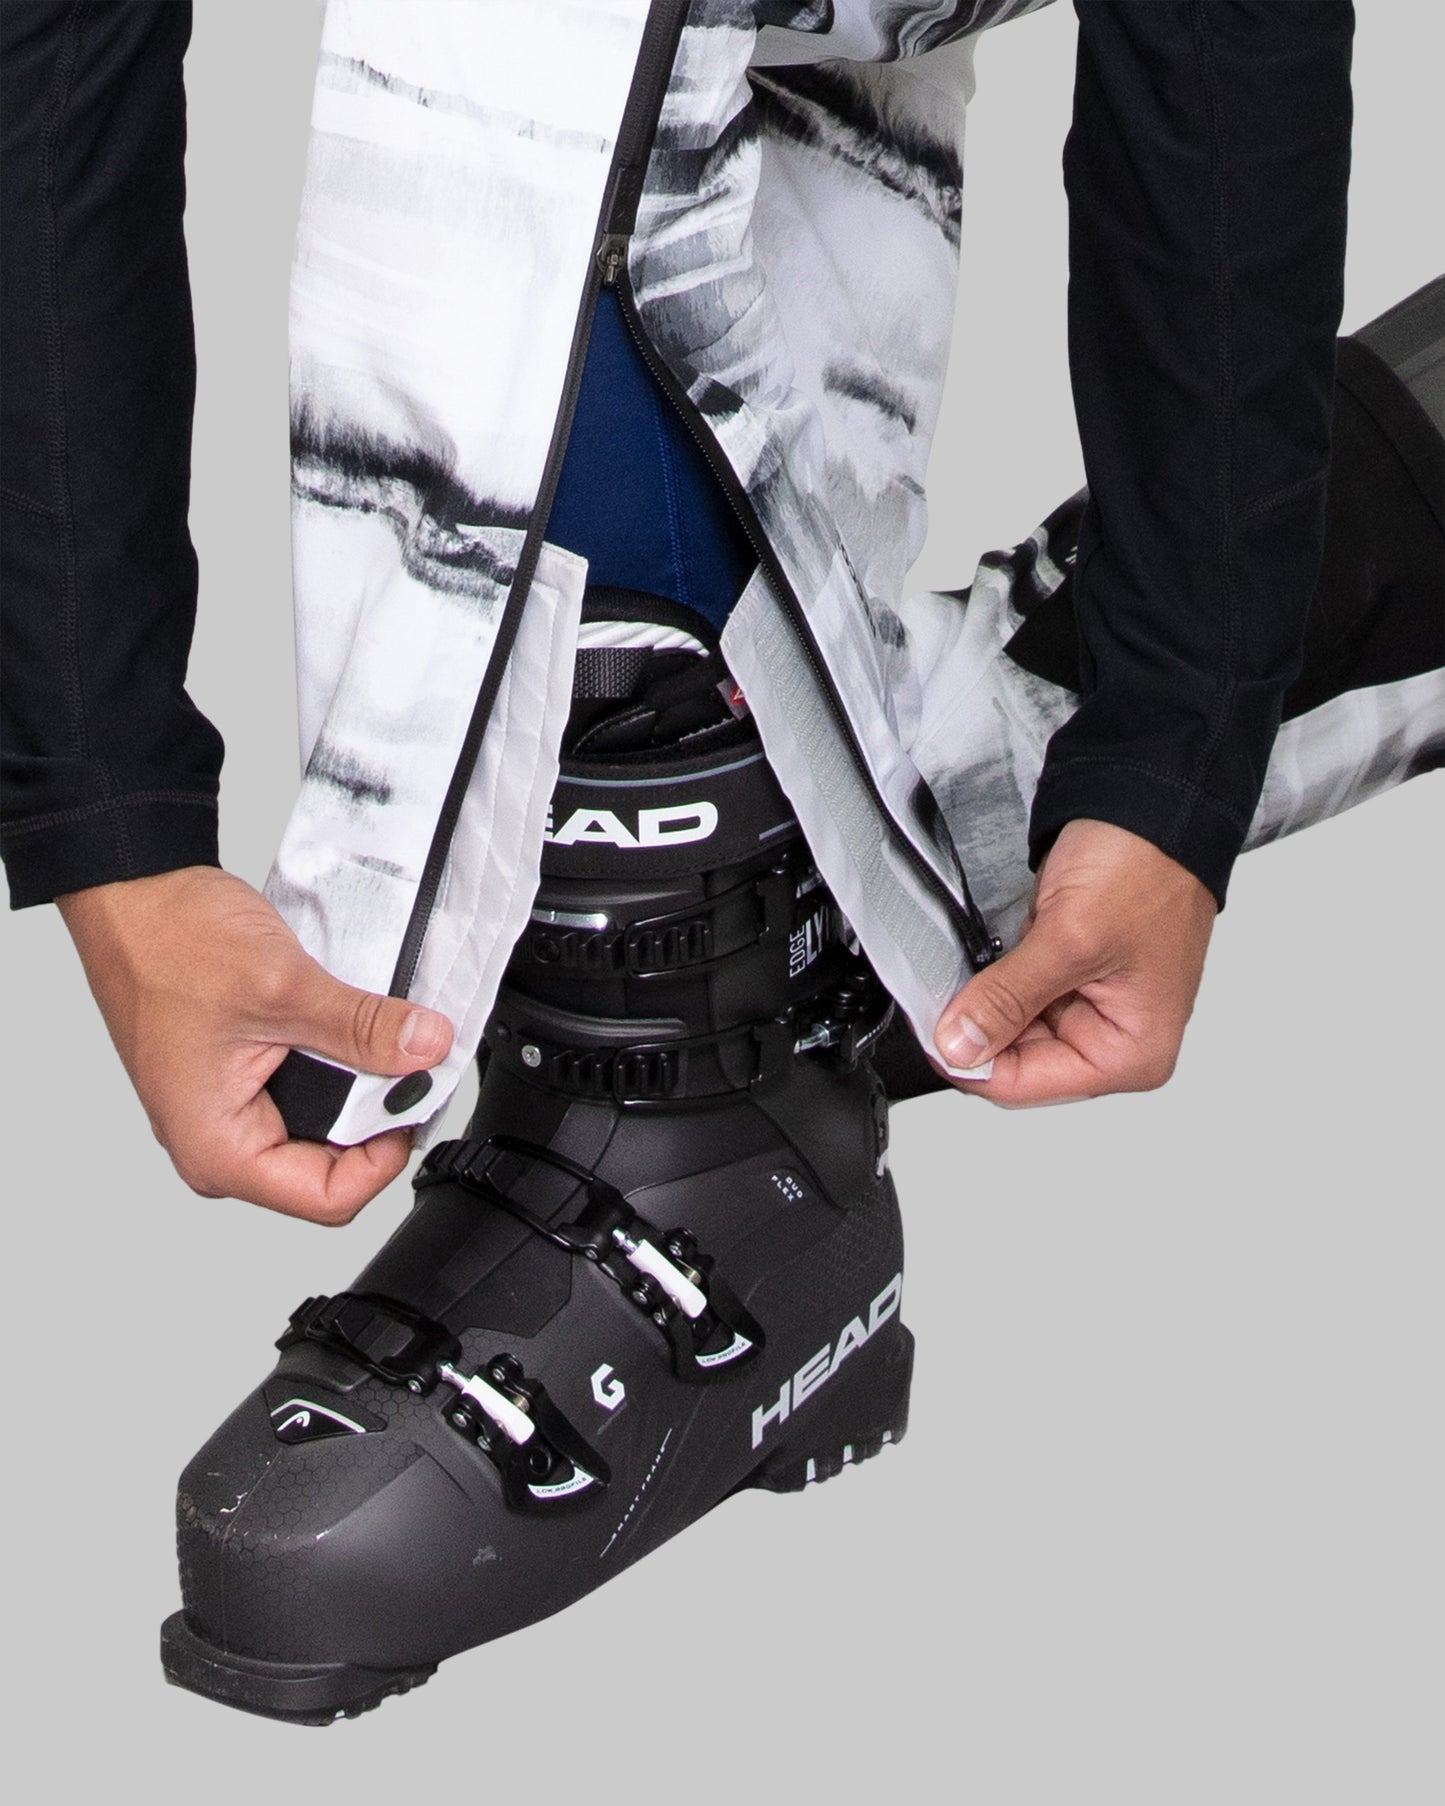 Adjustable, water-resistant powder cuffs with gripper elastic | Protection from the elements was the prime goal of the design process of these cuffs. Boot gripping elastic ensures top-tier performance.